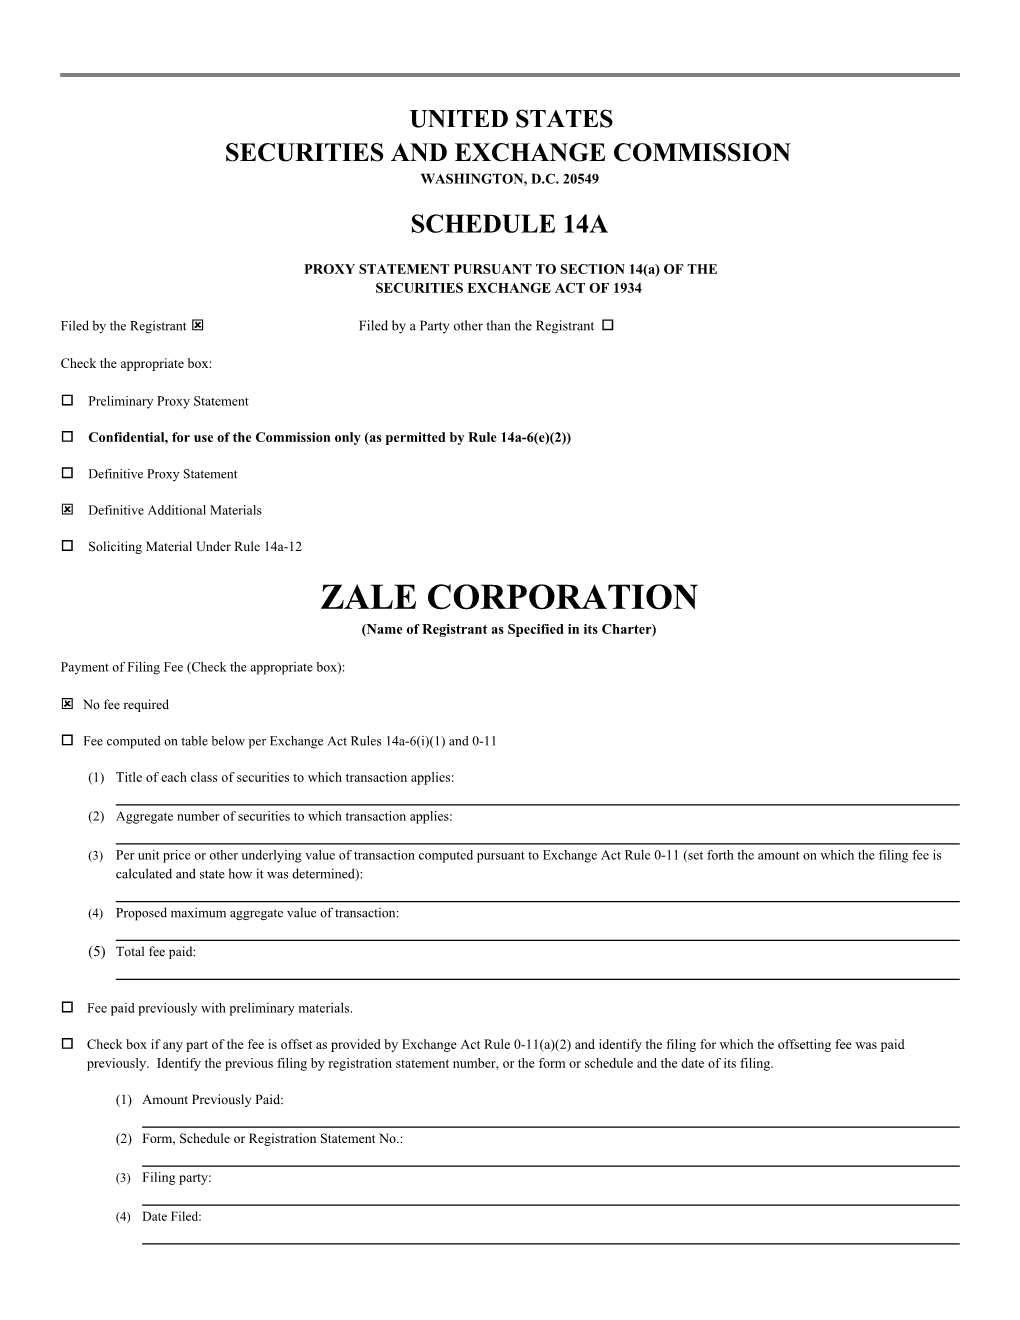 ZALE CORPORATION (Name of Registrant As Specified in Its Charter)